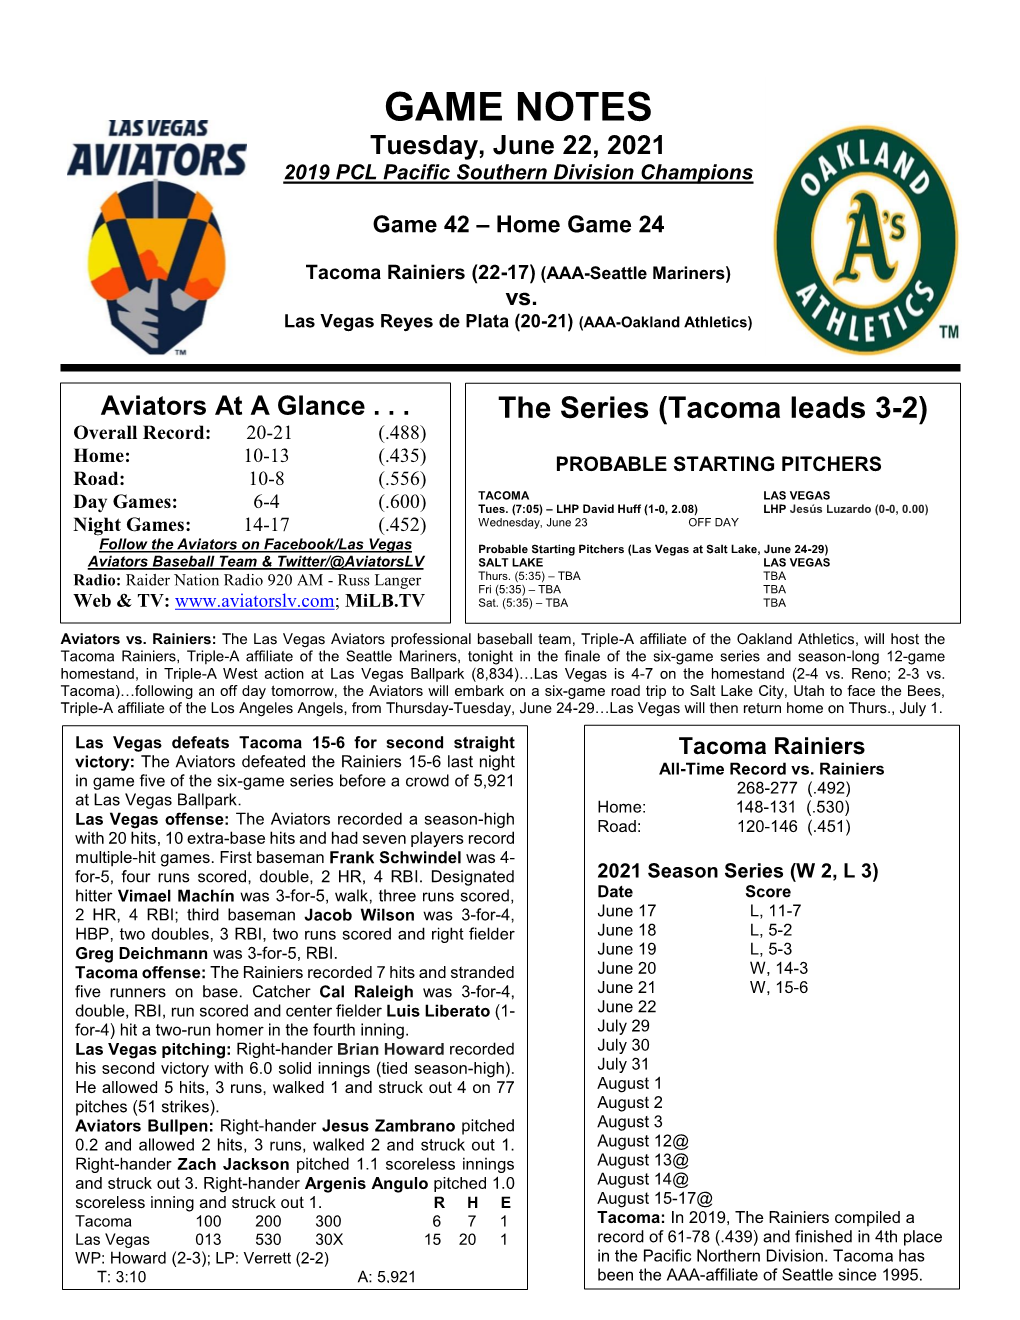 GAME NOTES Tuesday, June 22, 2021